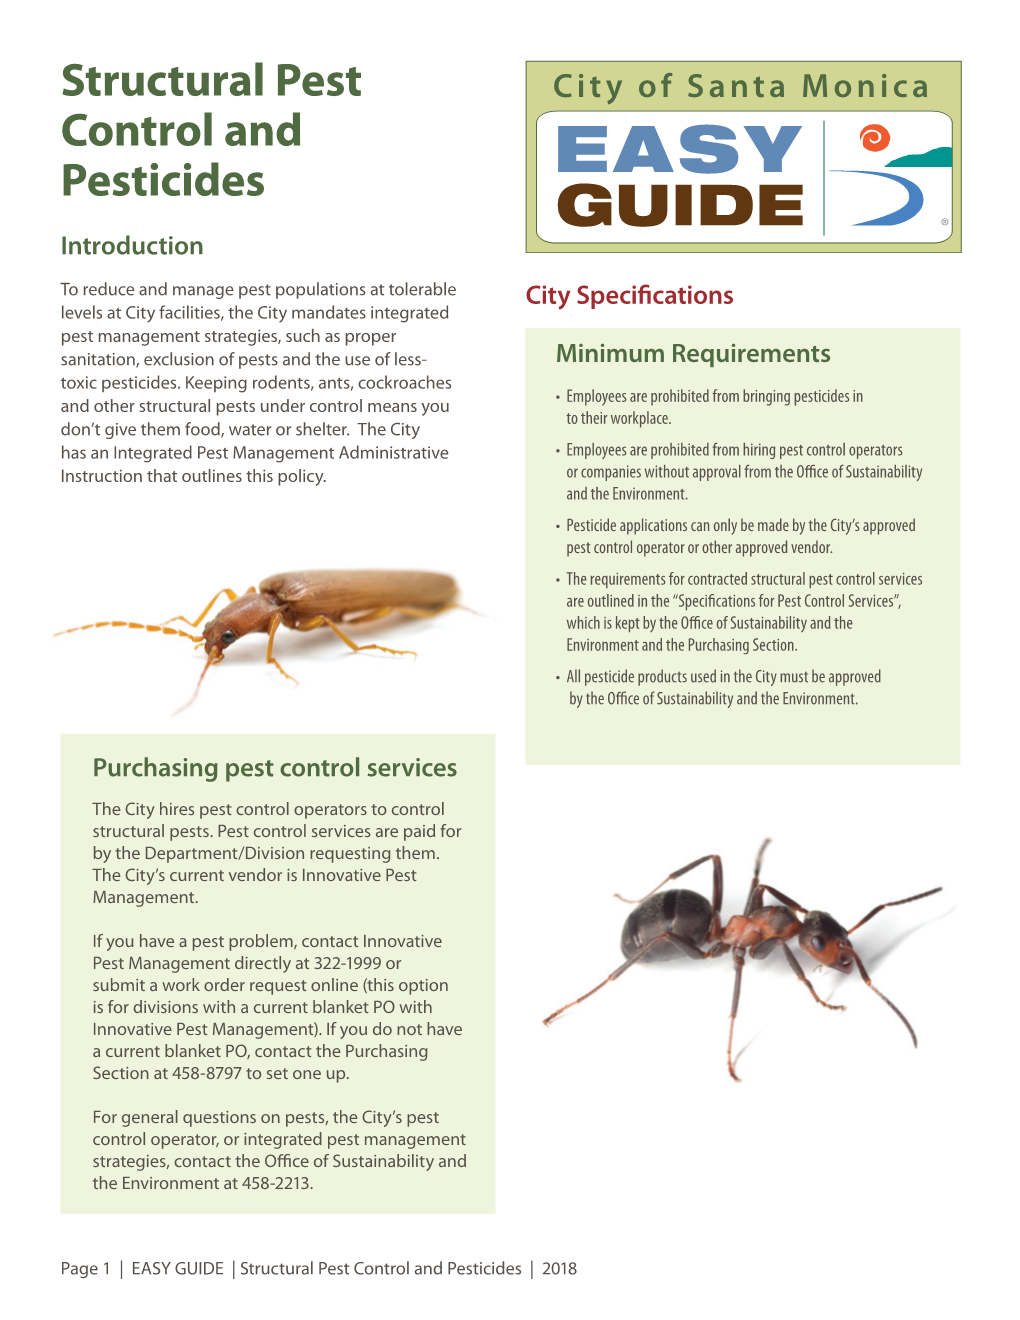 Structural Pest Control and Pesticides